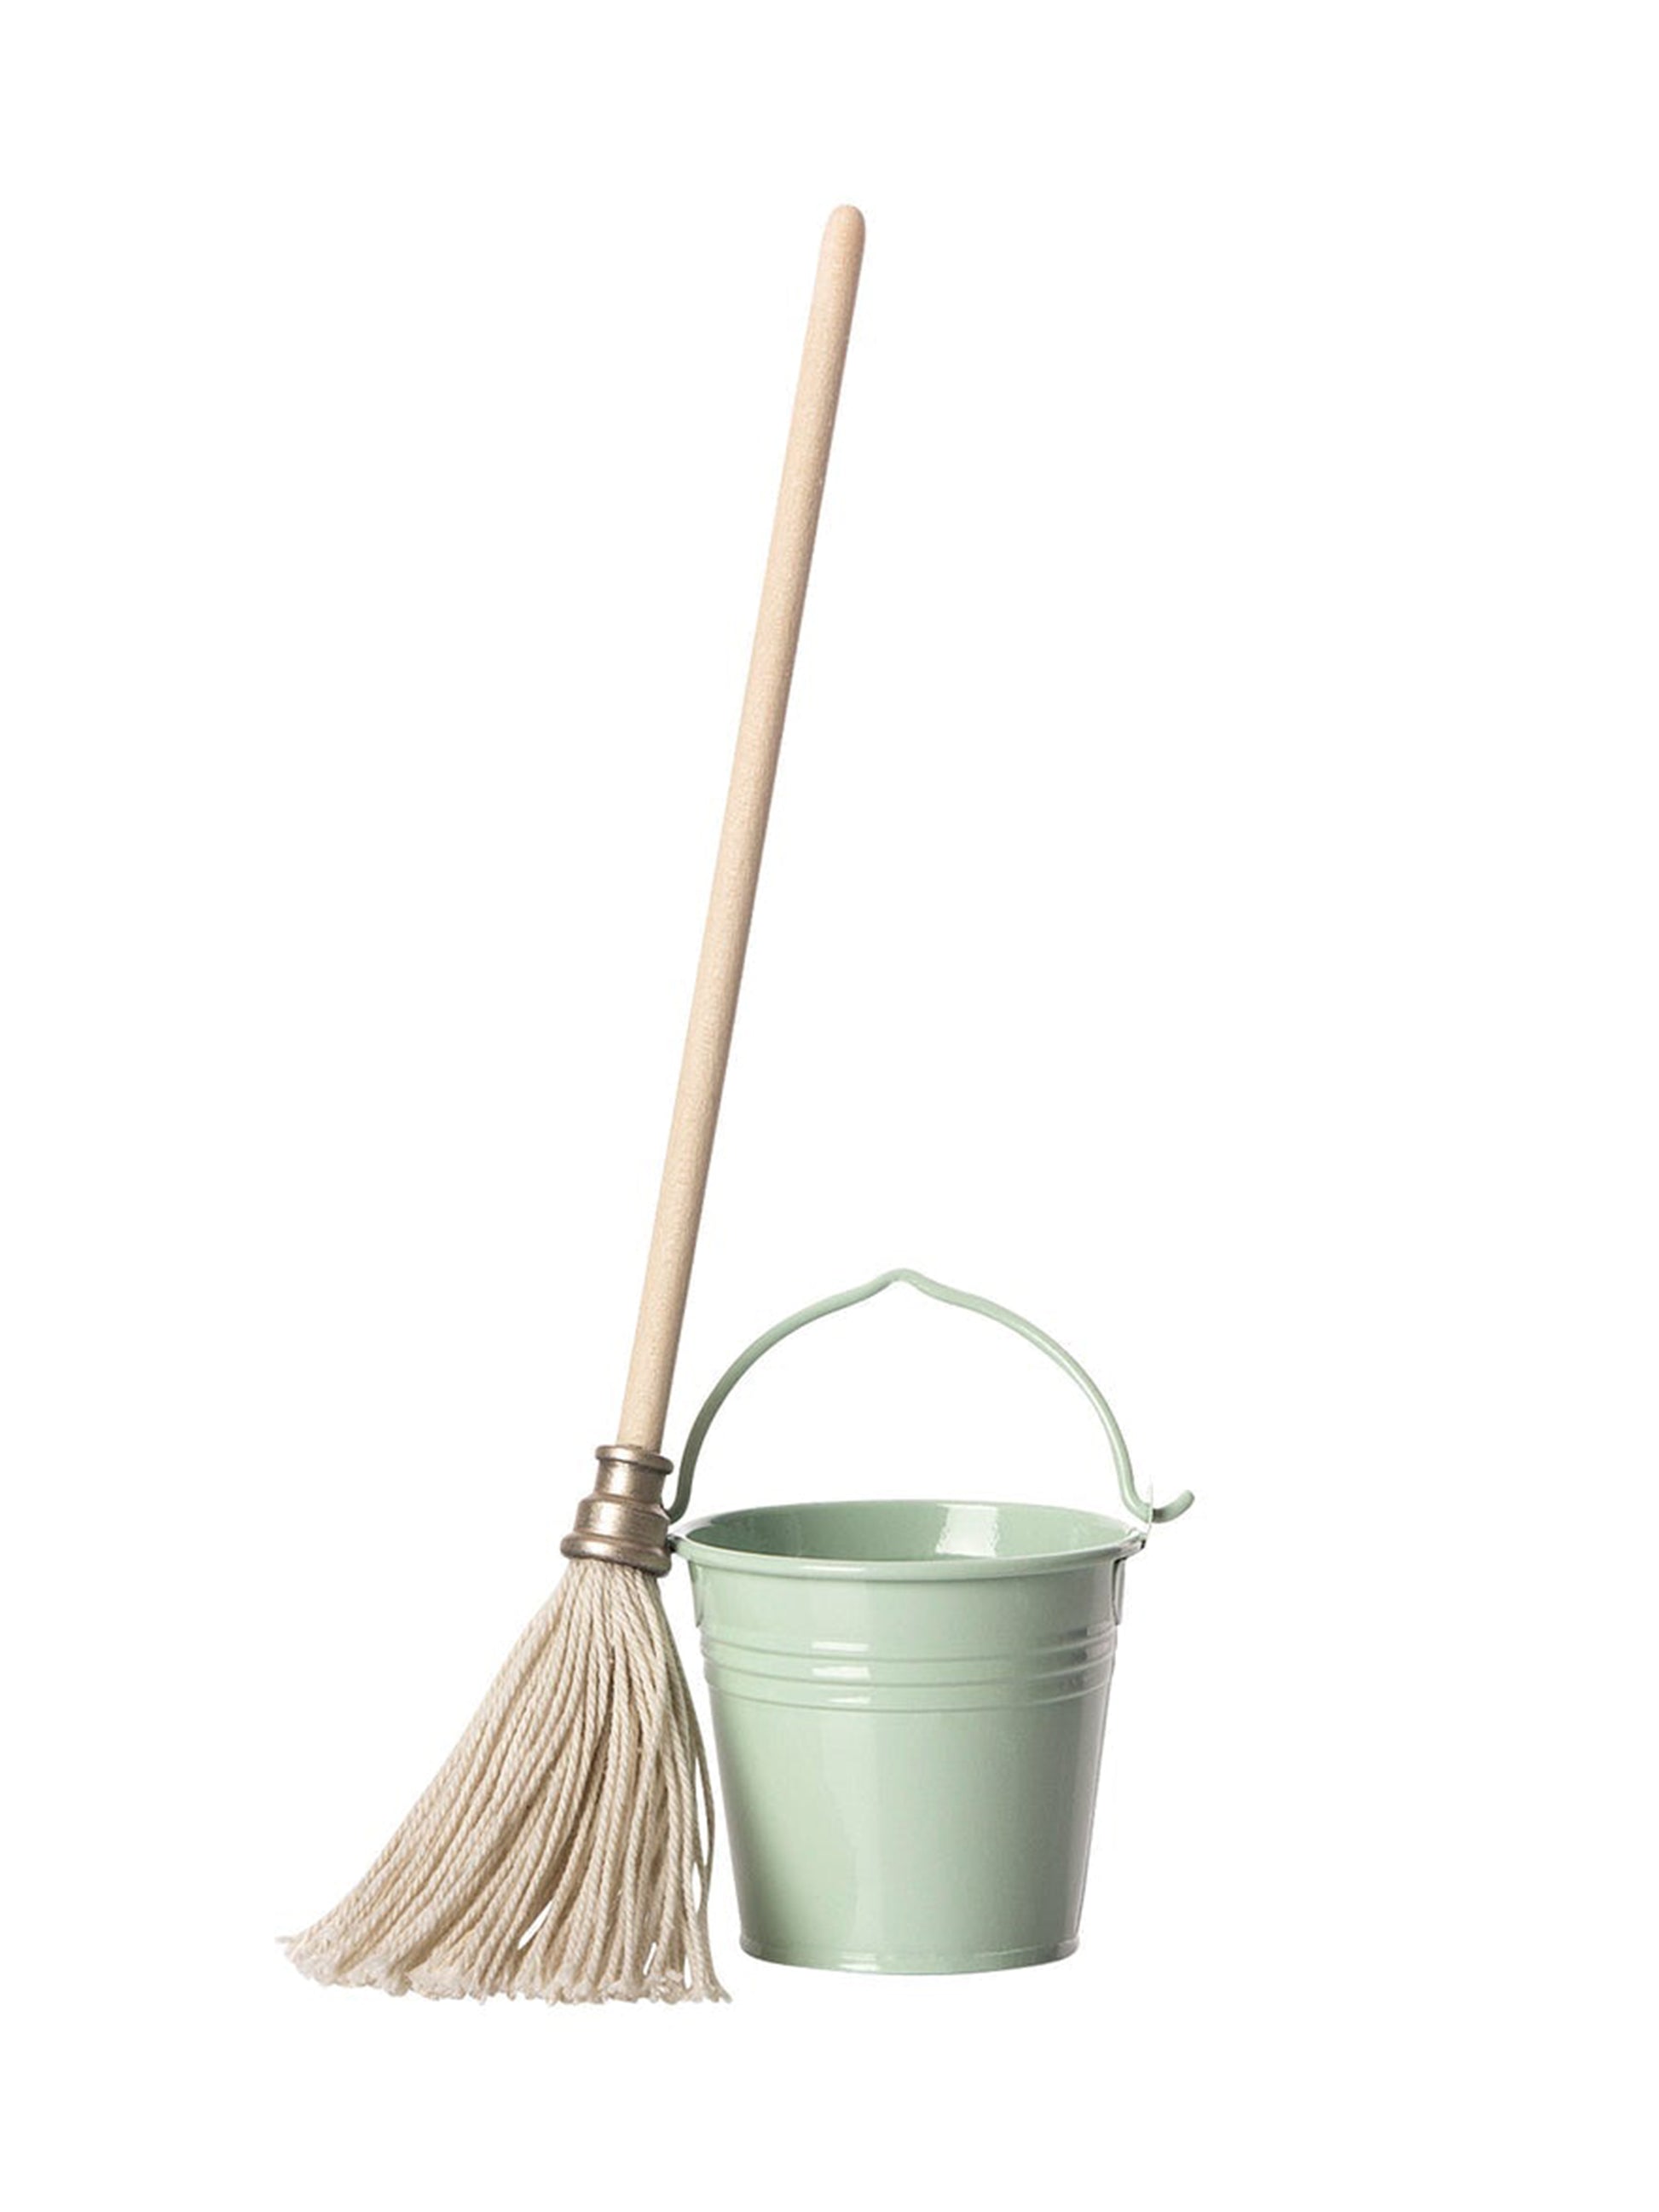 Shop the Maileg Bucket & Mop at Weston Table